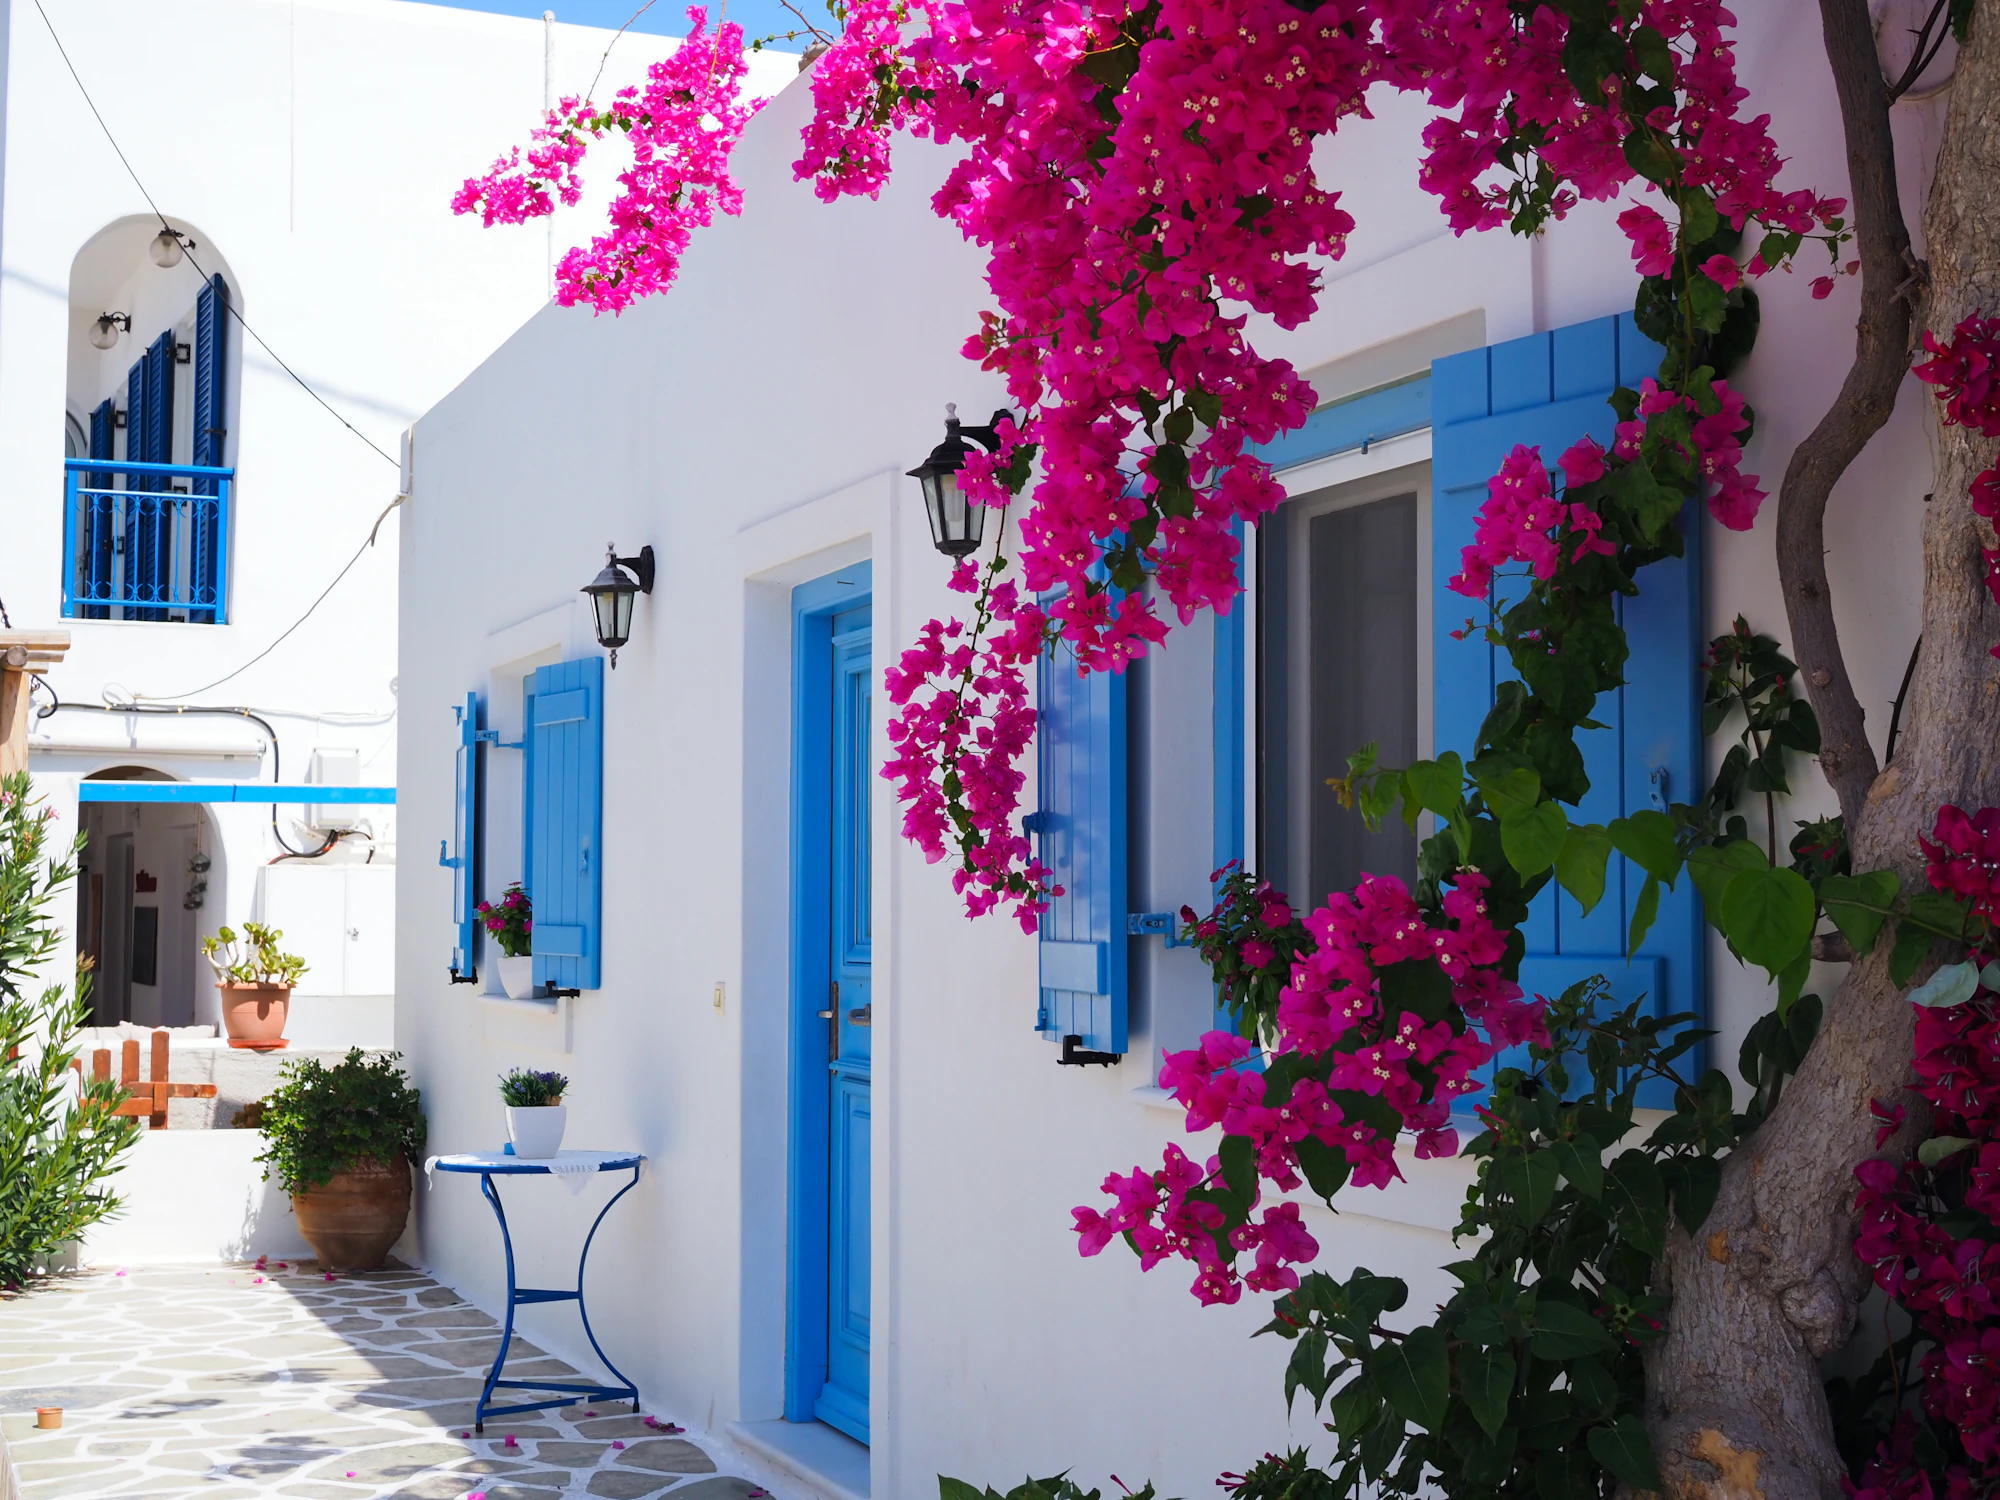 Traditional white-washed Greek house adorned with vibrant flowers in bloom, showcasing the charming architecture of Greece.